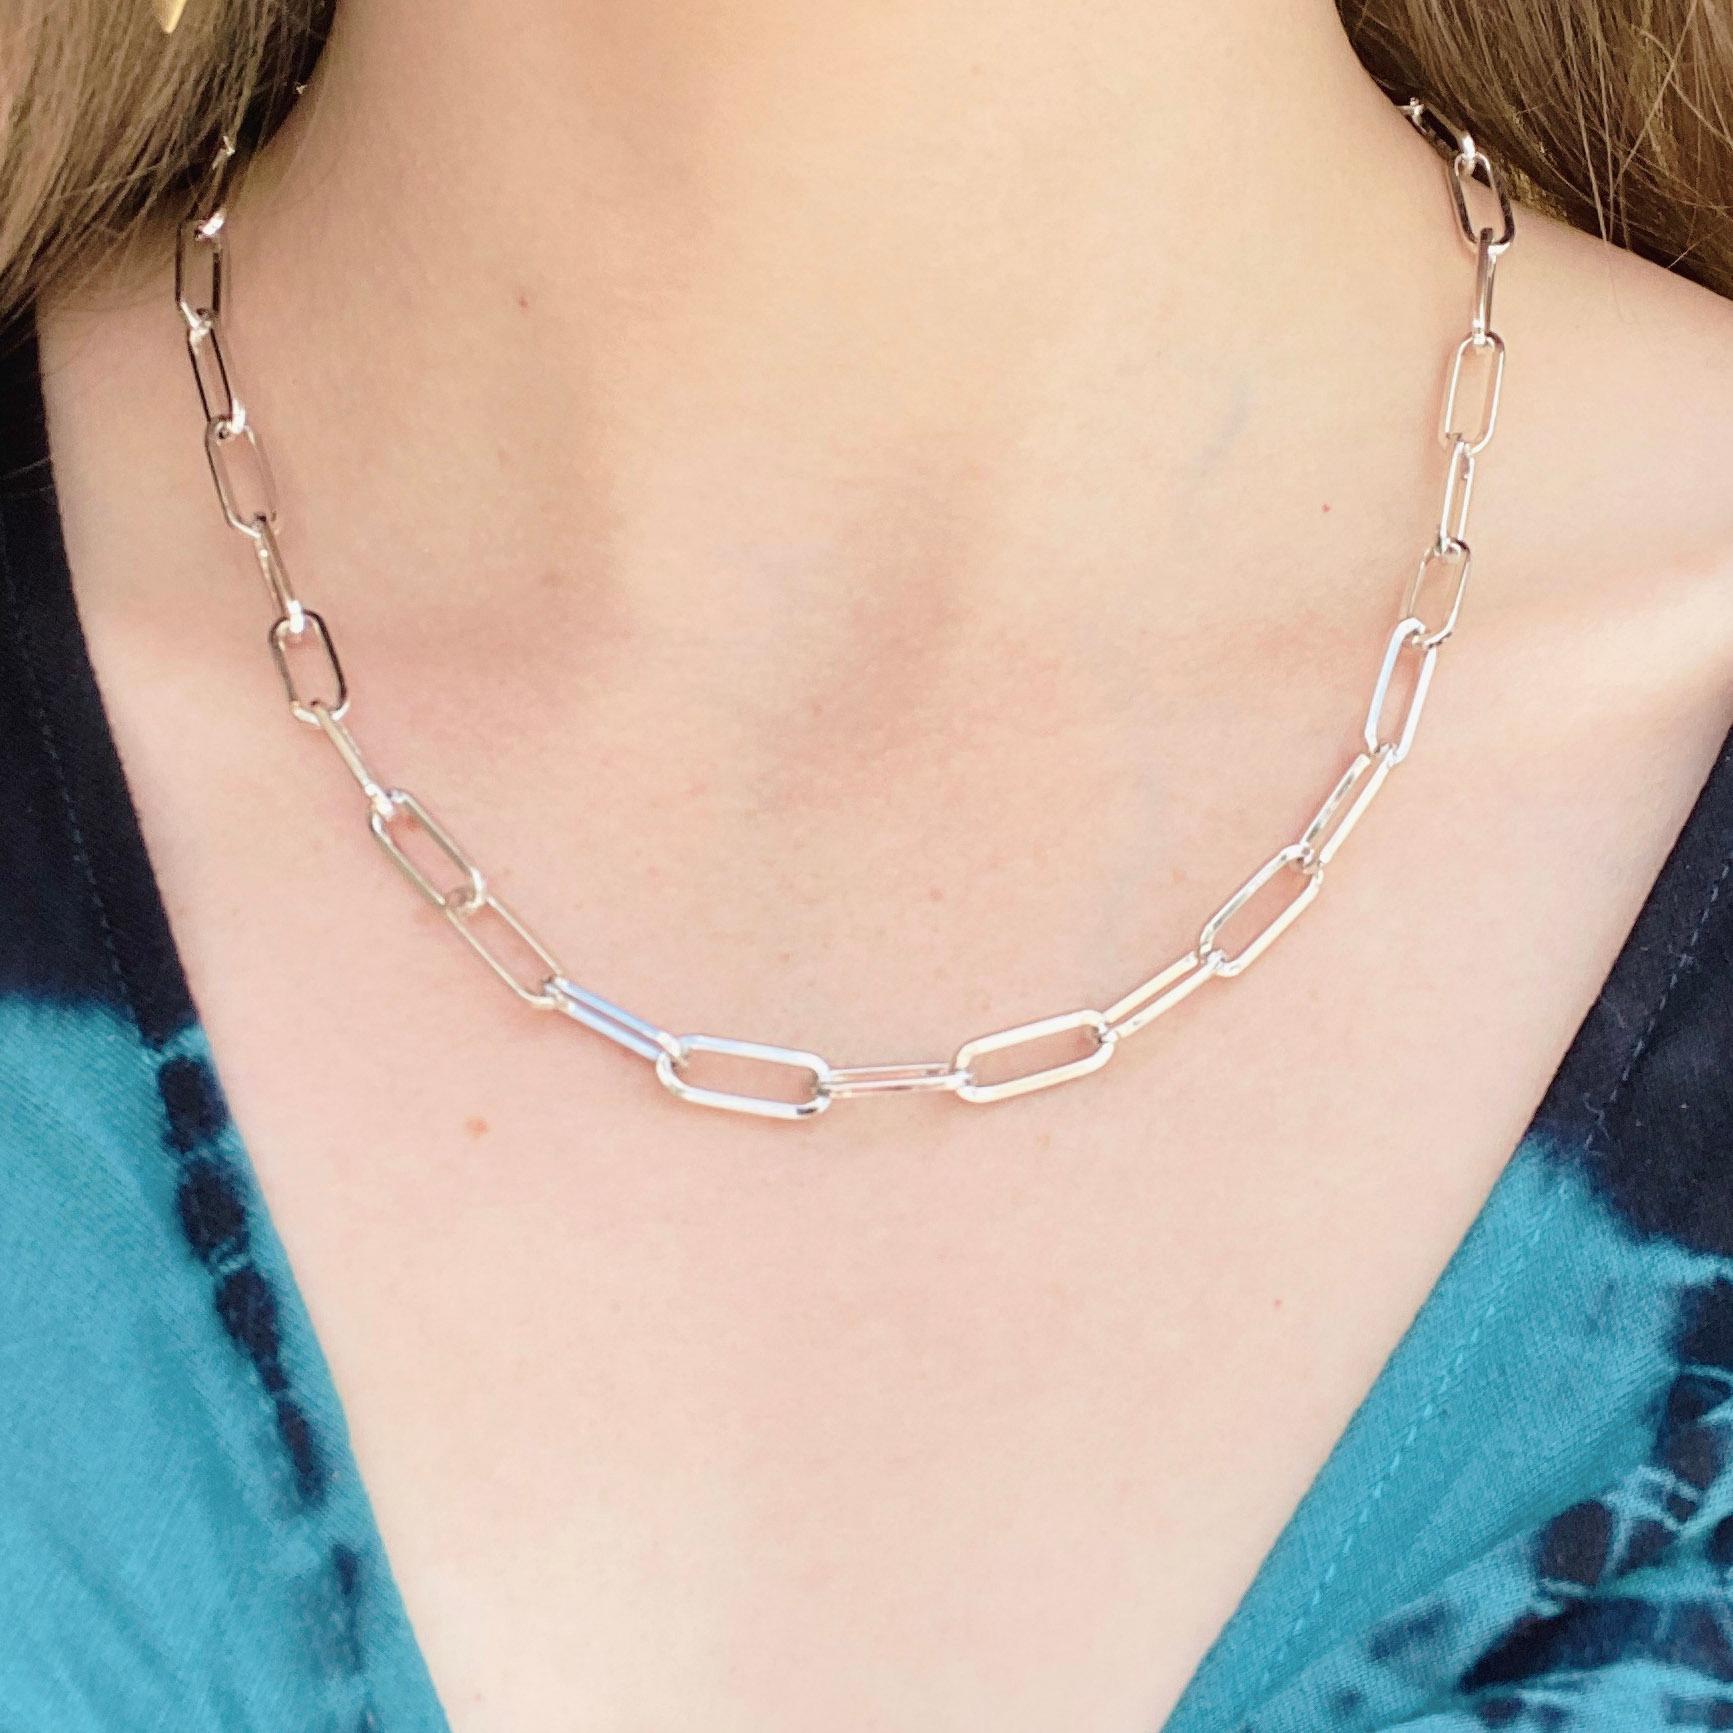 Sterling Silver Paperclip Chain is the 2020 Best Design!  The details are as follows:

Link Width: 6.5mm/.26in
Link Height: 14.93mm/.59in
Chain Length: 38in
Weight: 25.2

This chain is available in 7.5 inches (6.5mm paperclip bracelet) and 18